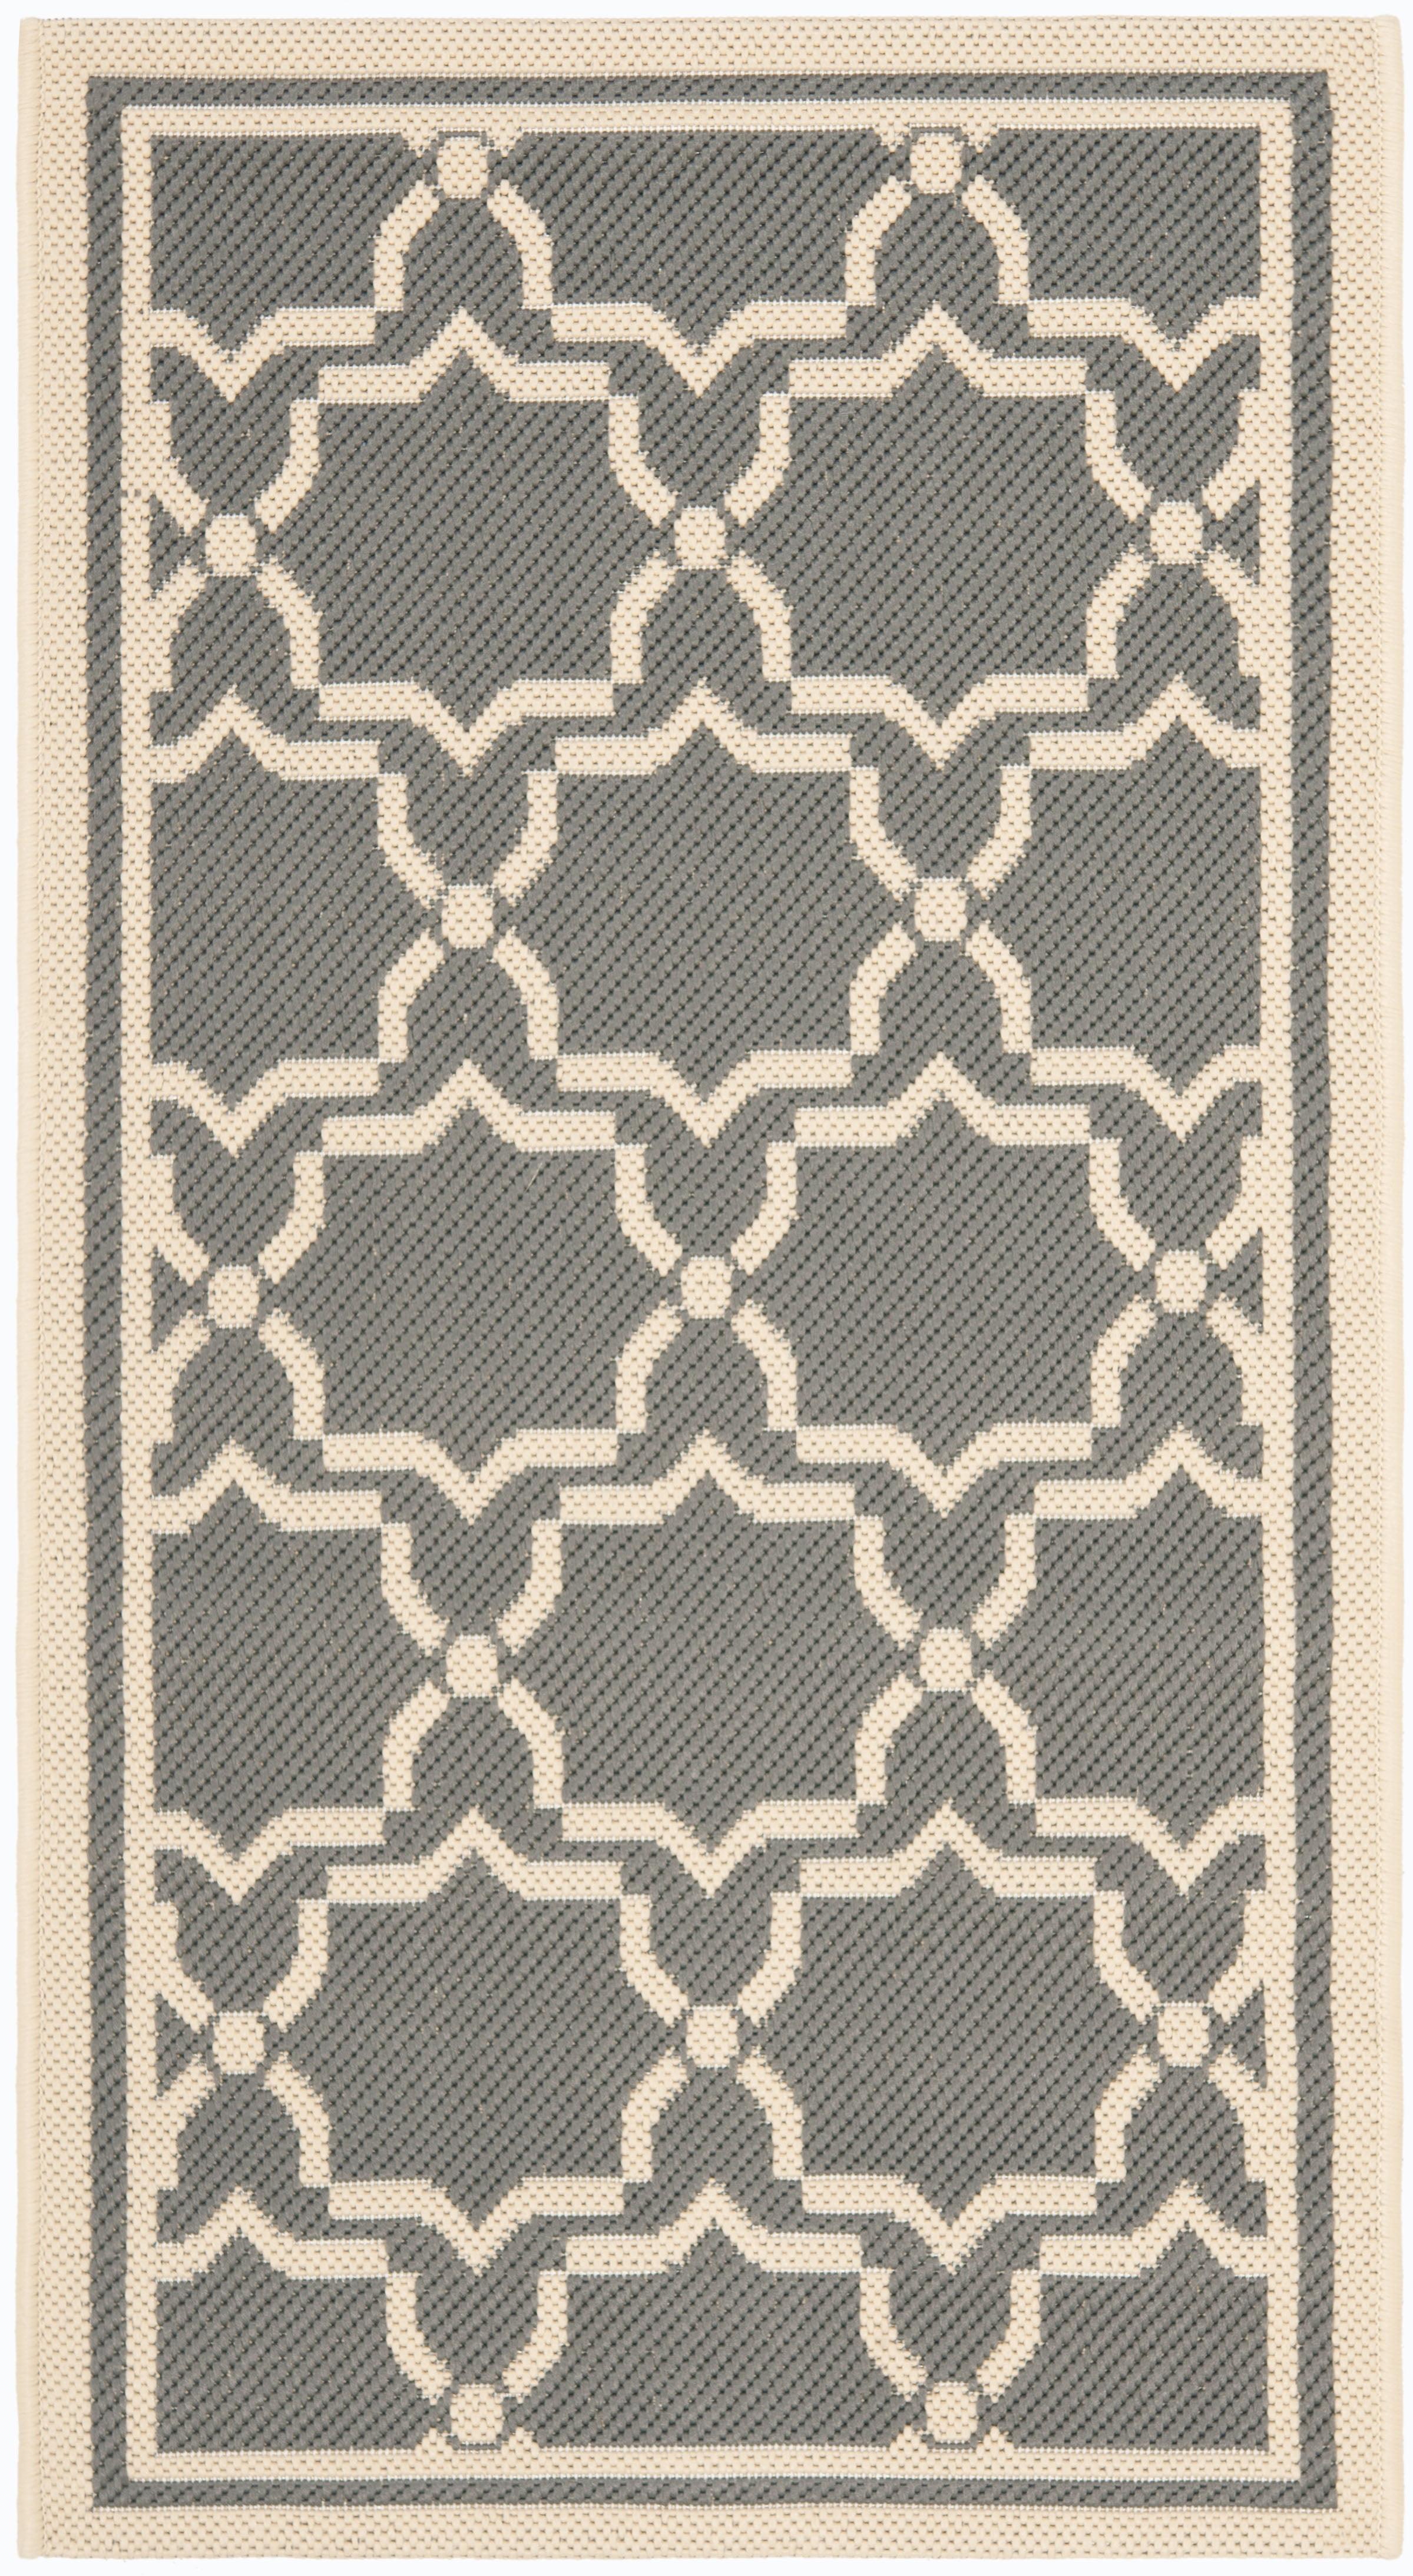 Modern Anthracite 5' x 7' Easy-Care Synthetic Area Rug